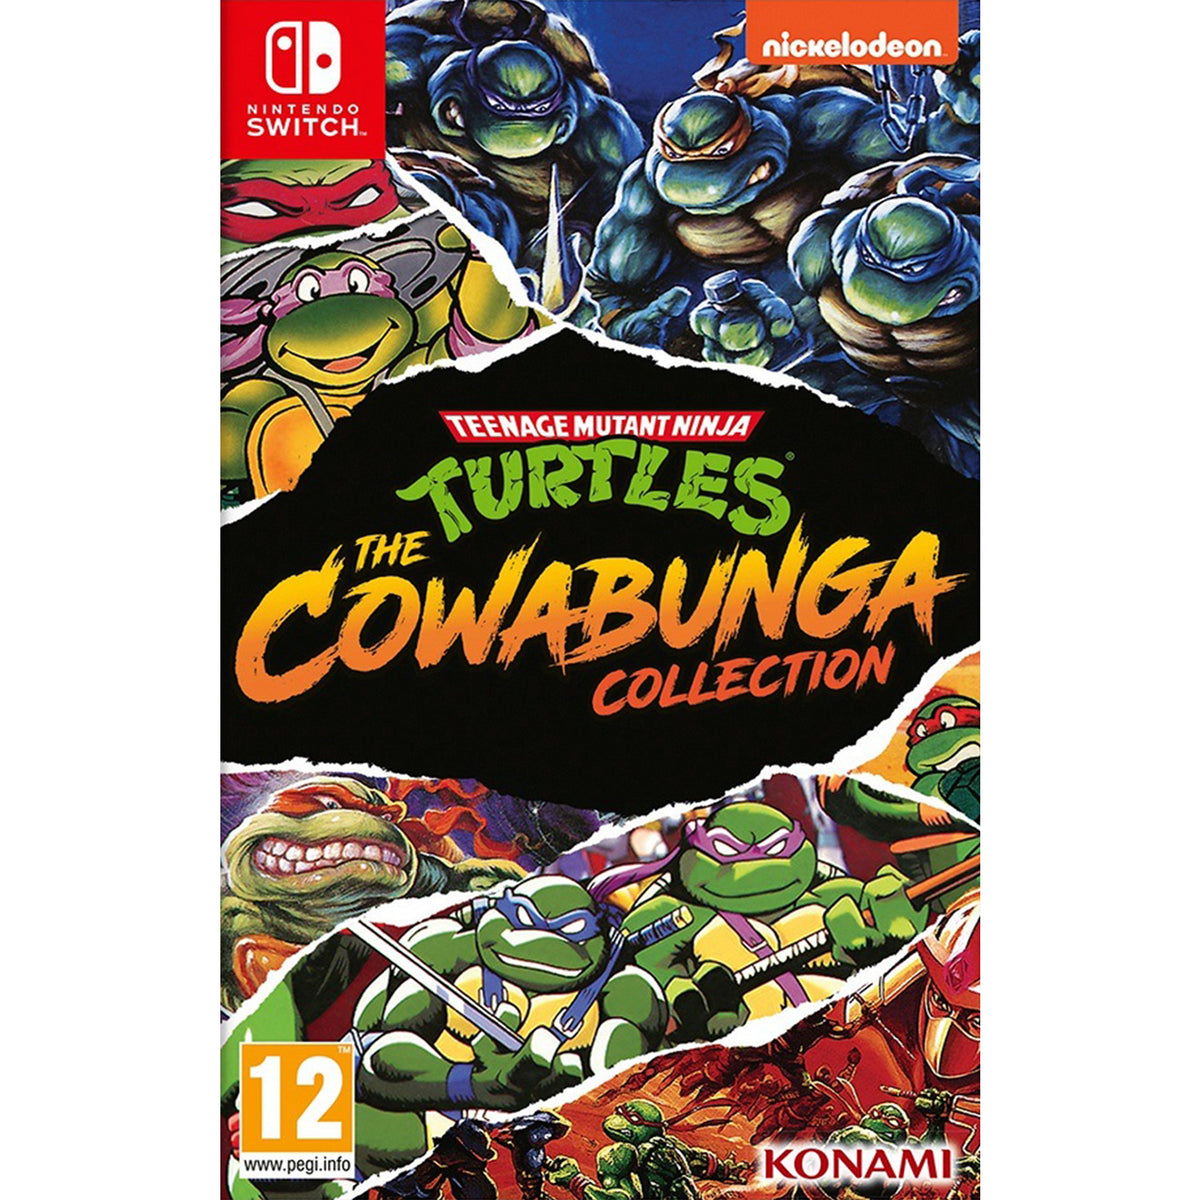 The - Collection Turtles: Entertainment Mutant Teenage Day! Deal The Switch Ninja Go\'s Of – Cowabunga